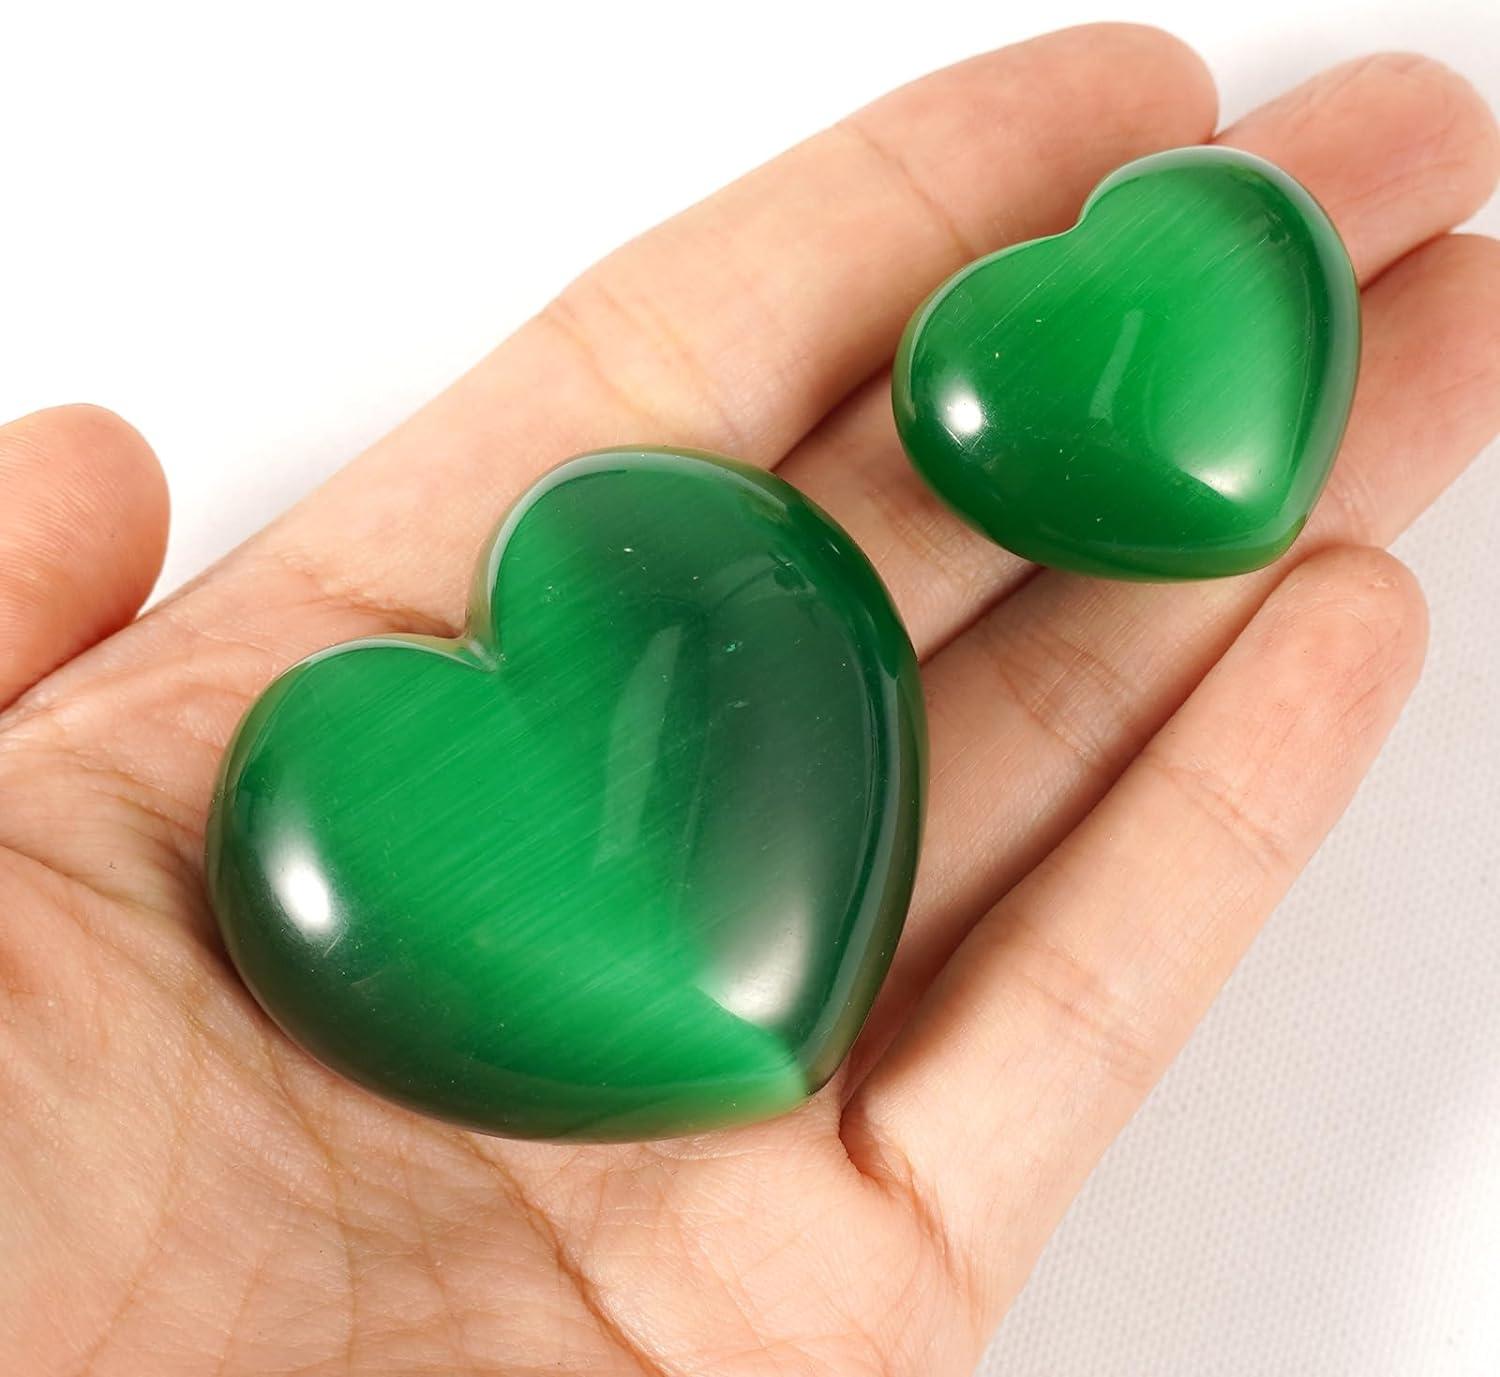 QIQIXIN 2 Piece Thumb Worry Stone Pocket Palm Stone Healing Crystals for  Anxiety Relief Items Teardrop Shaped Smooth Stones (Green Aventurine and